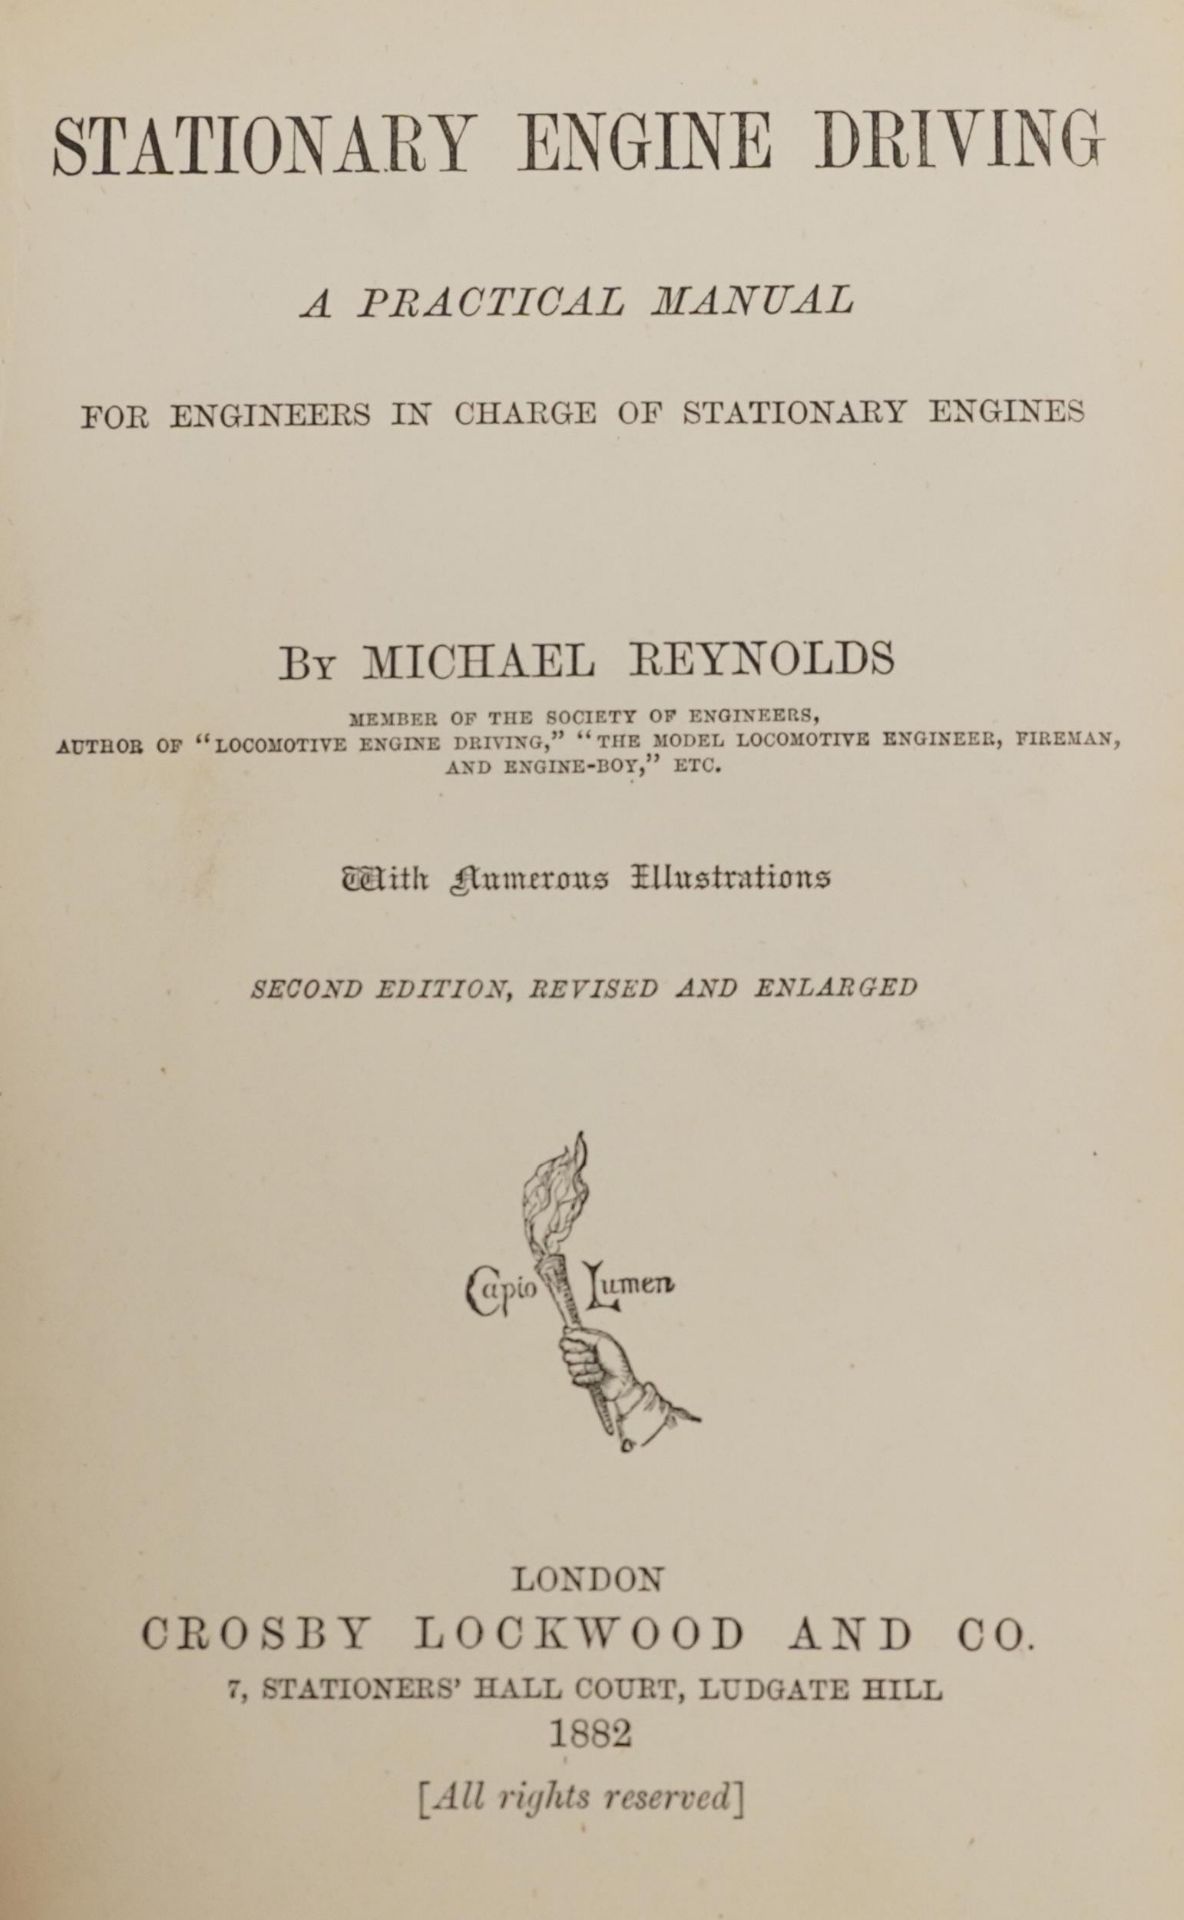 Stationary Engine Driving, Victorian hardback book by Michael Reynolds published London Crosby, - Image 2 of 3